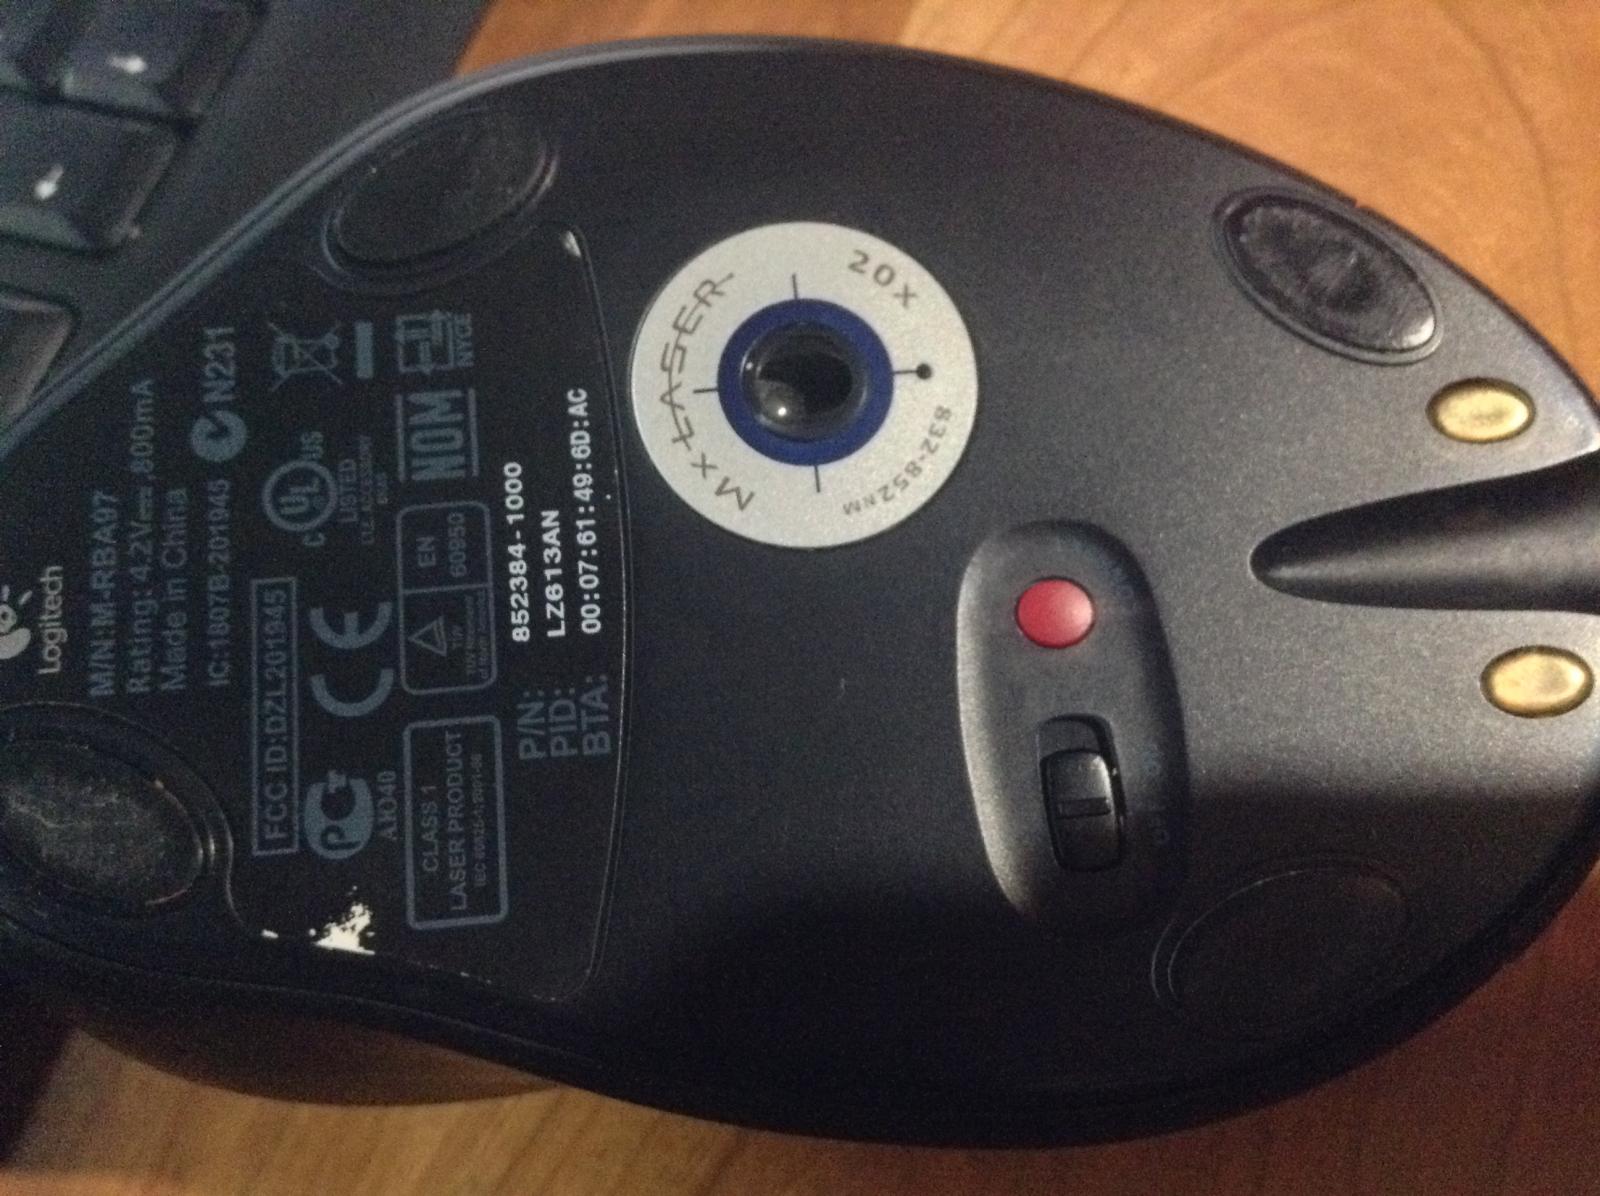 Steam mouse not working фото 100